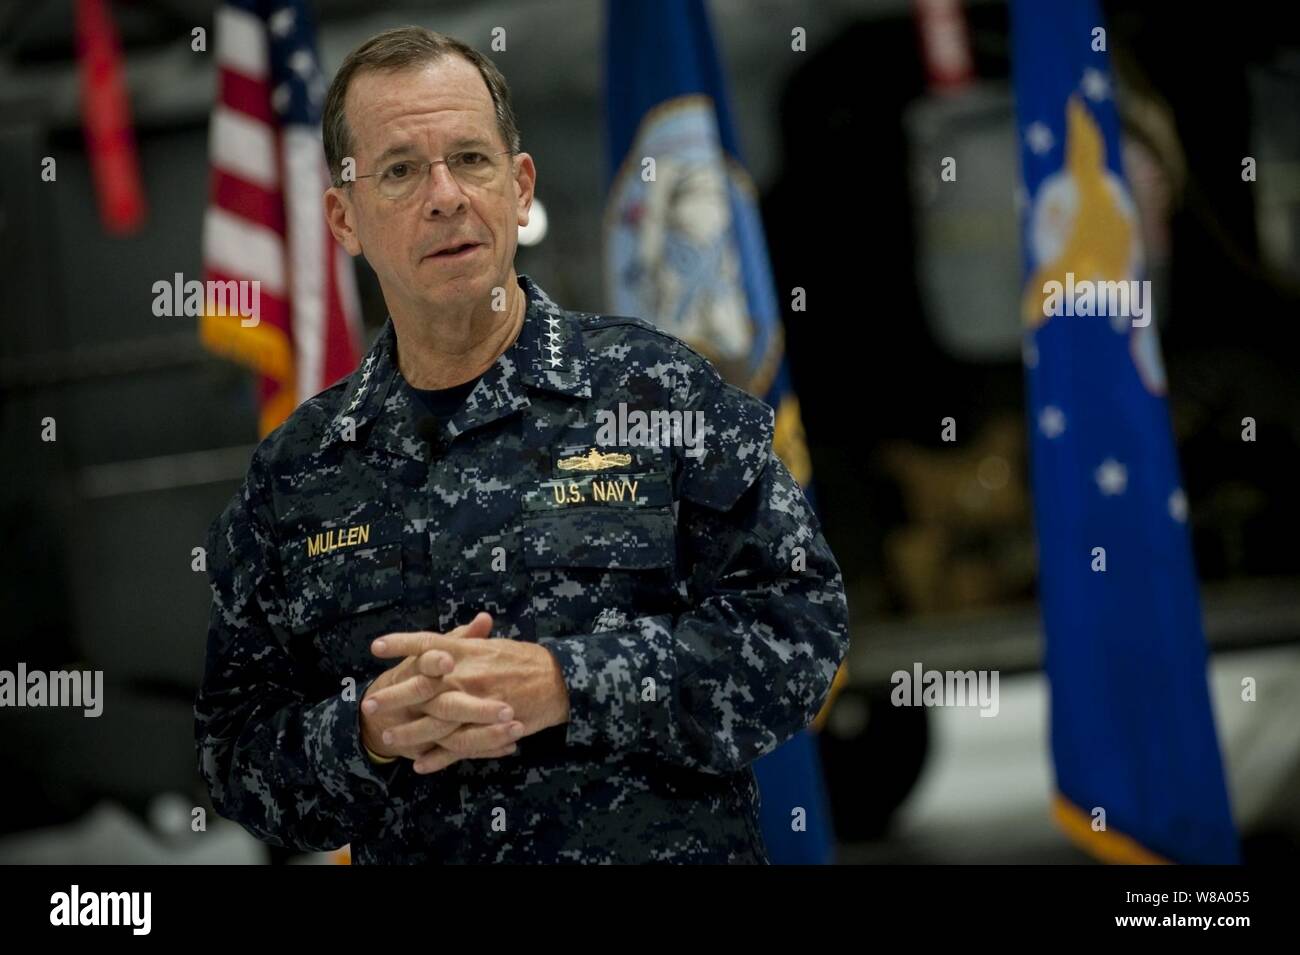 Chairman of the Joint Chiefs of Staff Adm. Mike Mullen, U.S. Navy, addresses airman assigned to the 58th Rescue Squadron at Nellis Air Force Base, Nev., on April 13, 2011. Stock Photo